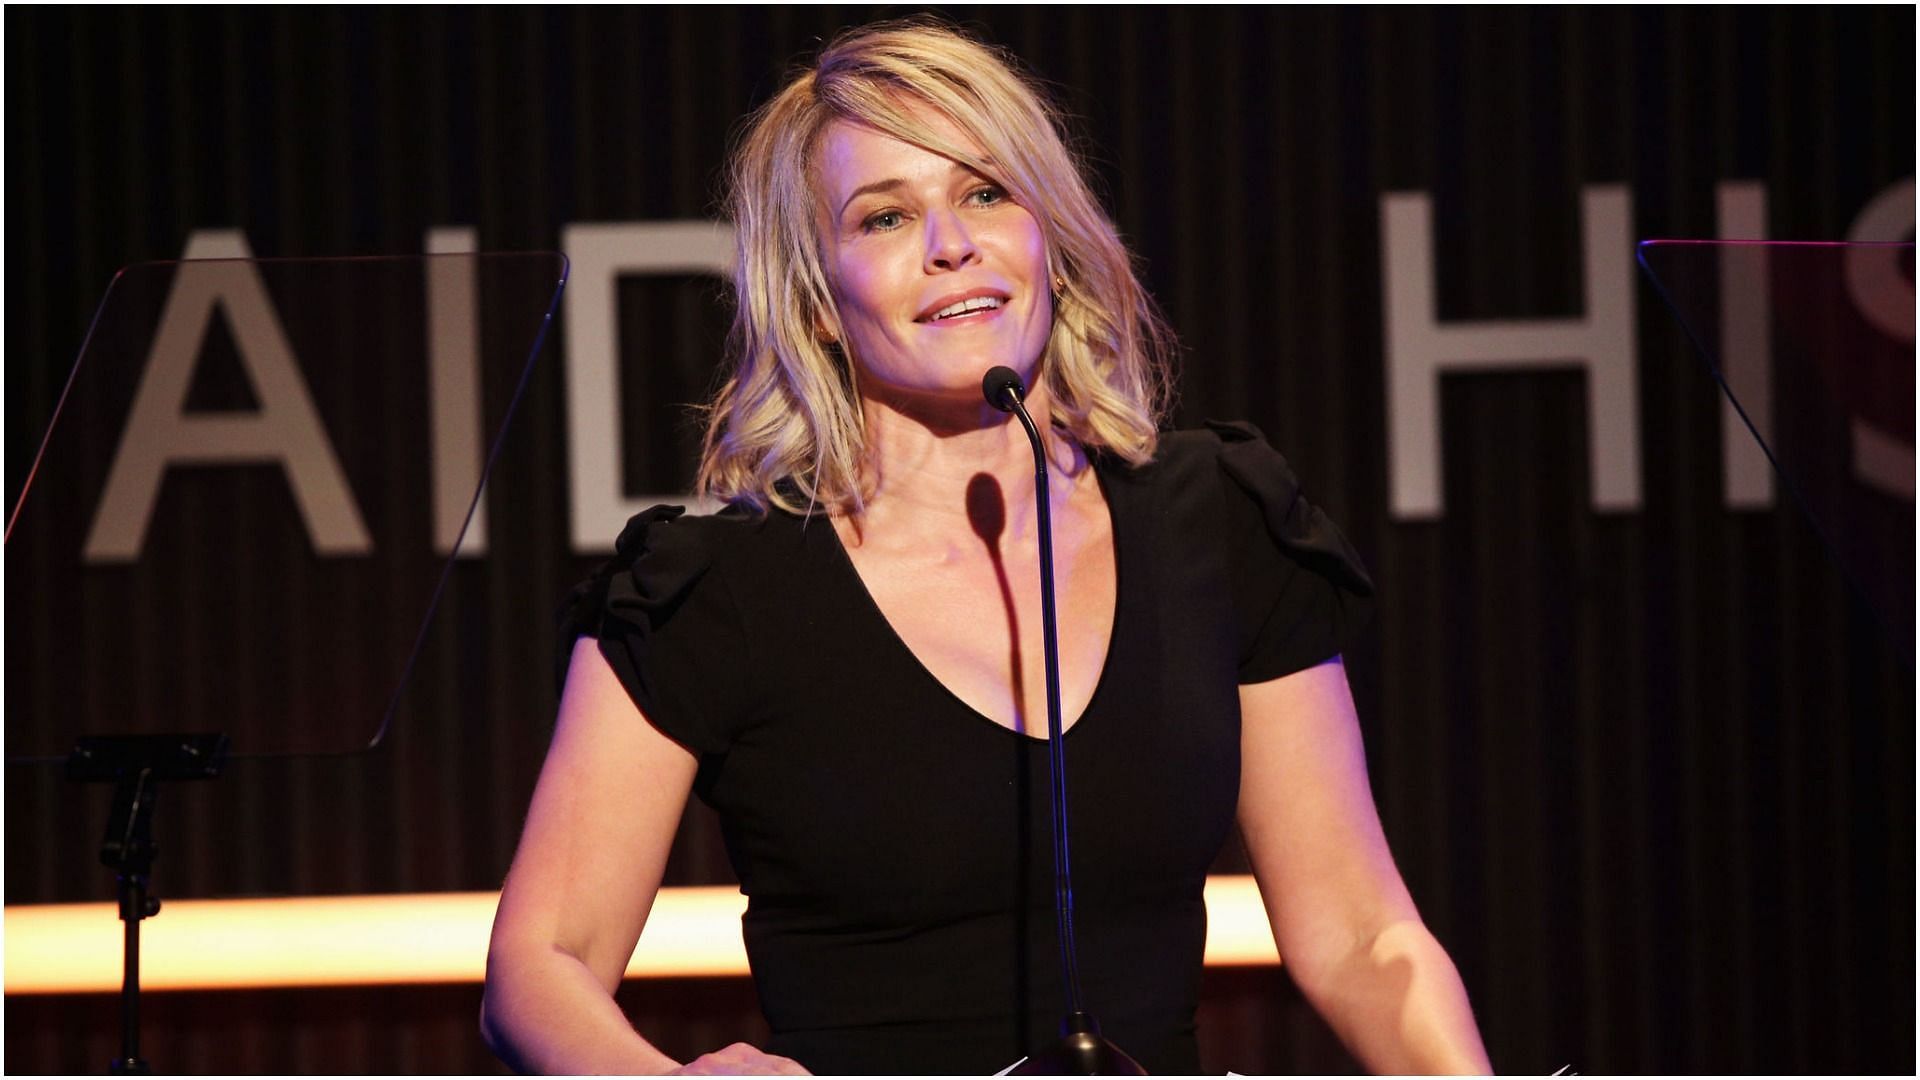 Chelsea Handler cancelled her shows after suffering a health scare (Image via Mike Windle/Getty Images)